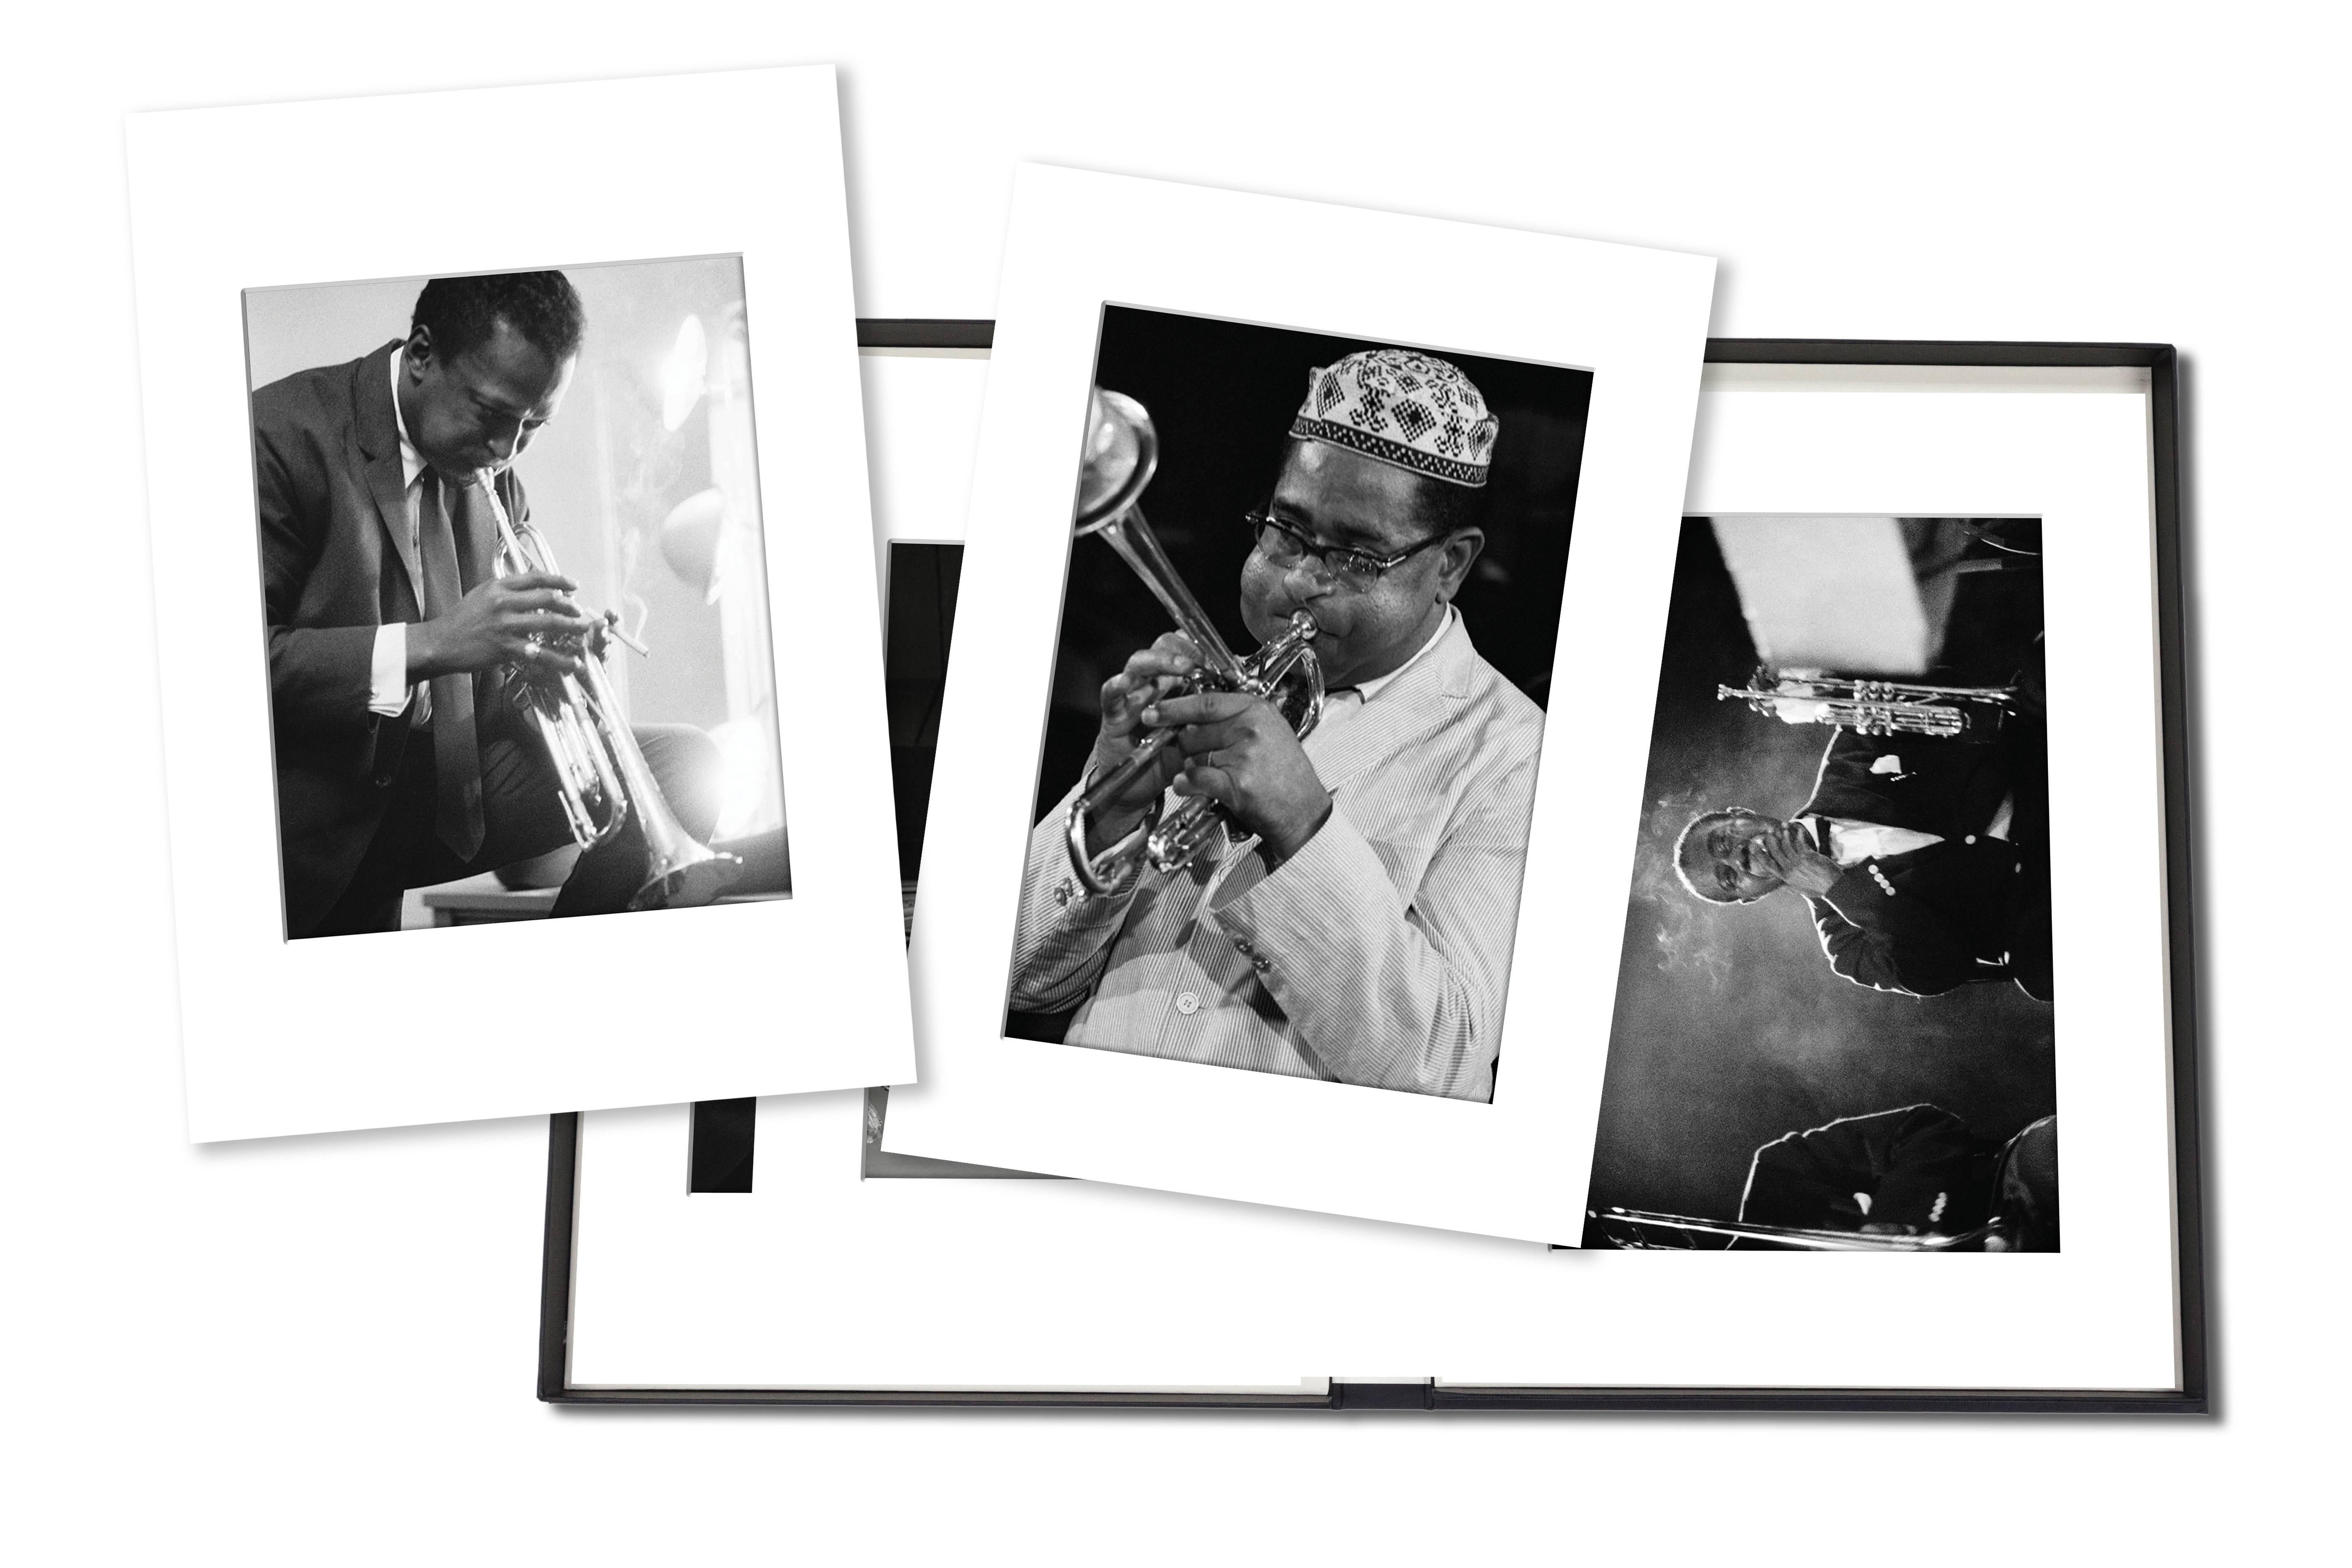 This collection of some of jazz’s most seminal musicians photographed by legendary photographer Ted Williams is assembled here in a limited-edition luxury box. The set includes portraits of – Miles Davis, Duke Ellington, Dizzy Gillespie, Louis